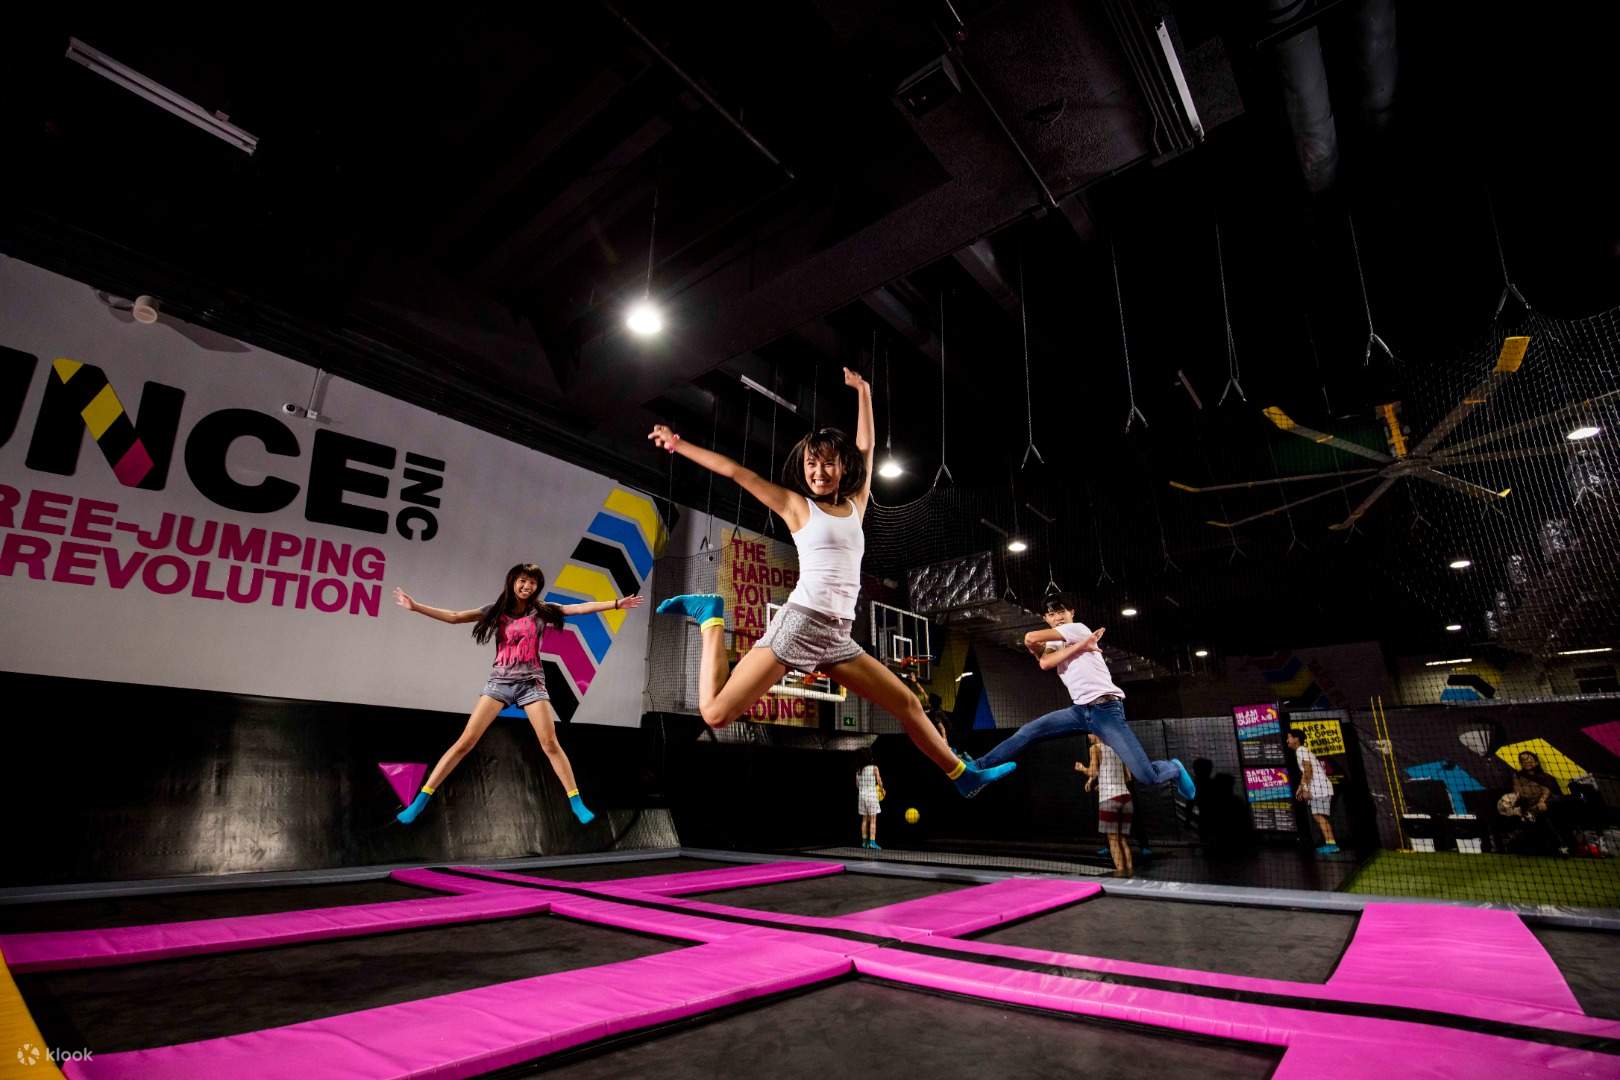 BOUNCE Singapore Trampoline Park: Price, Review, Important Things